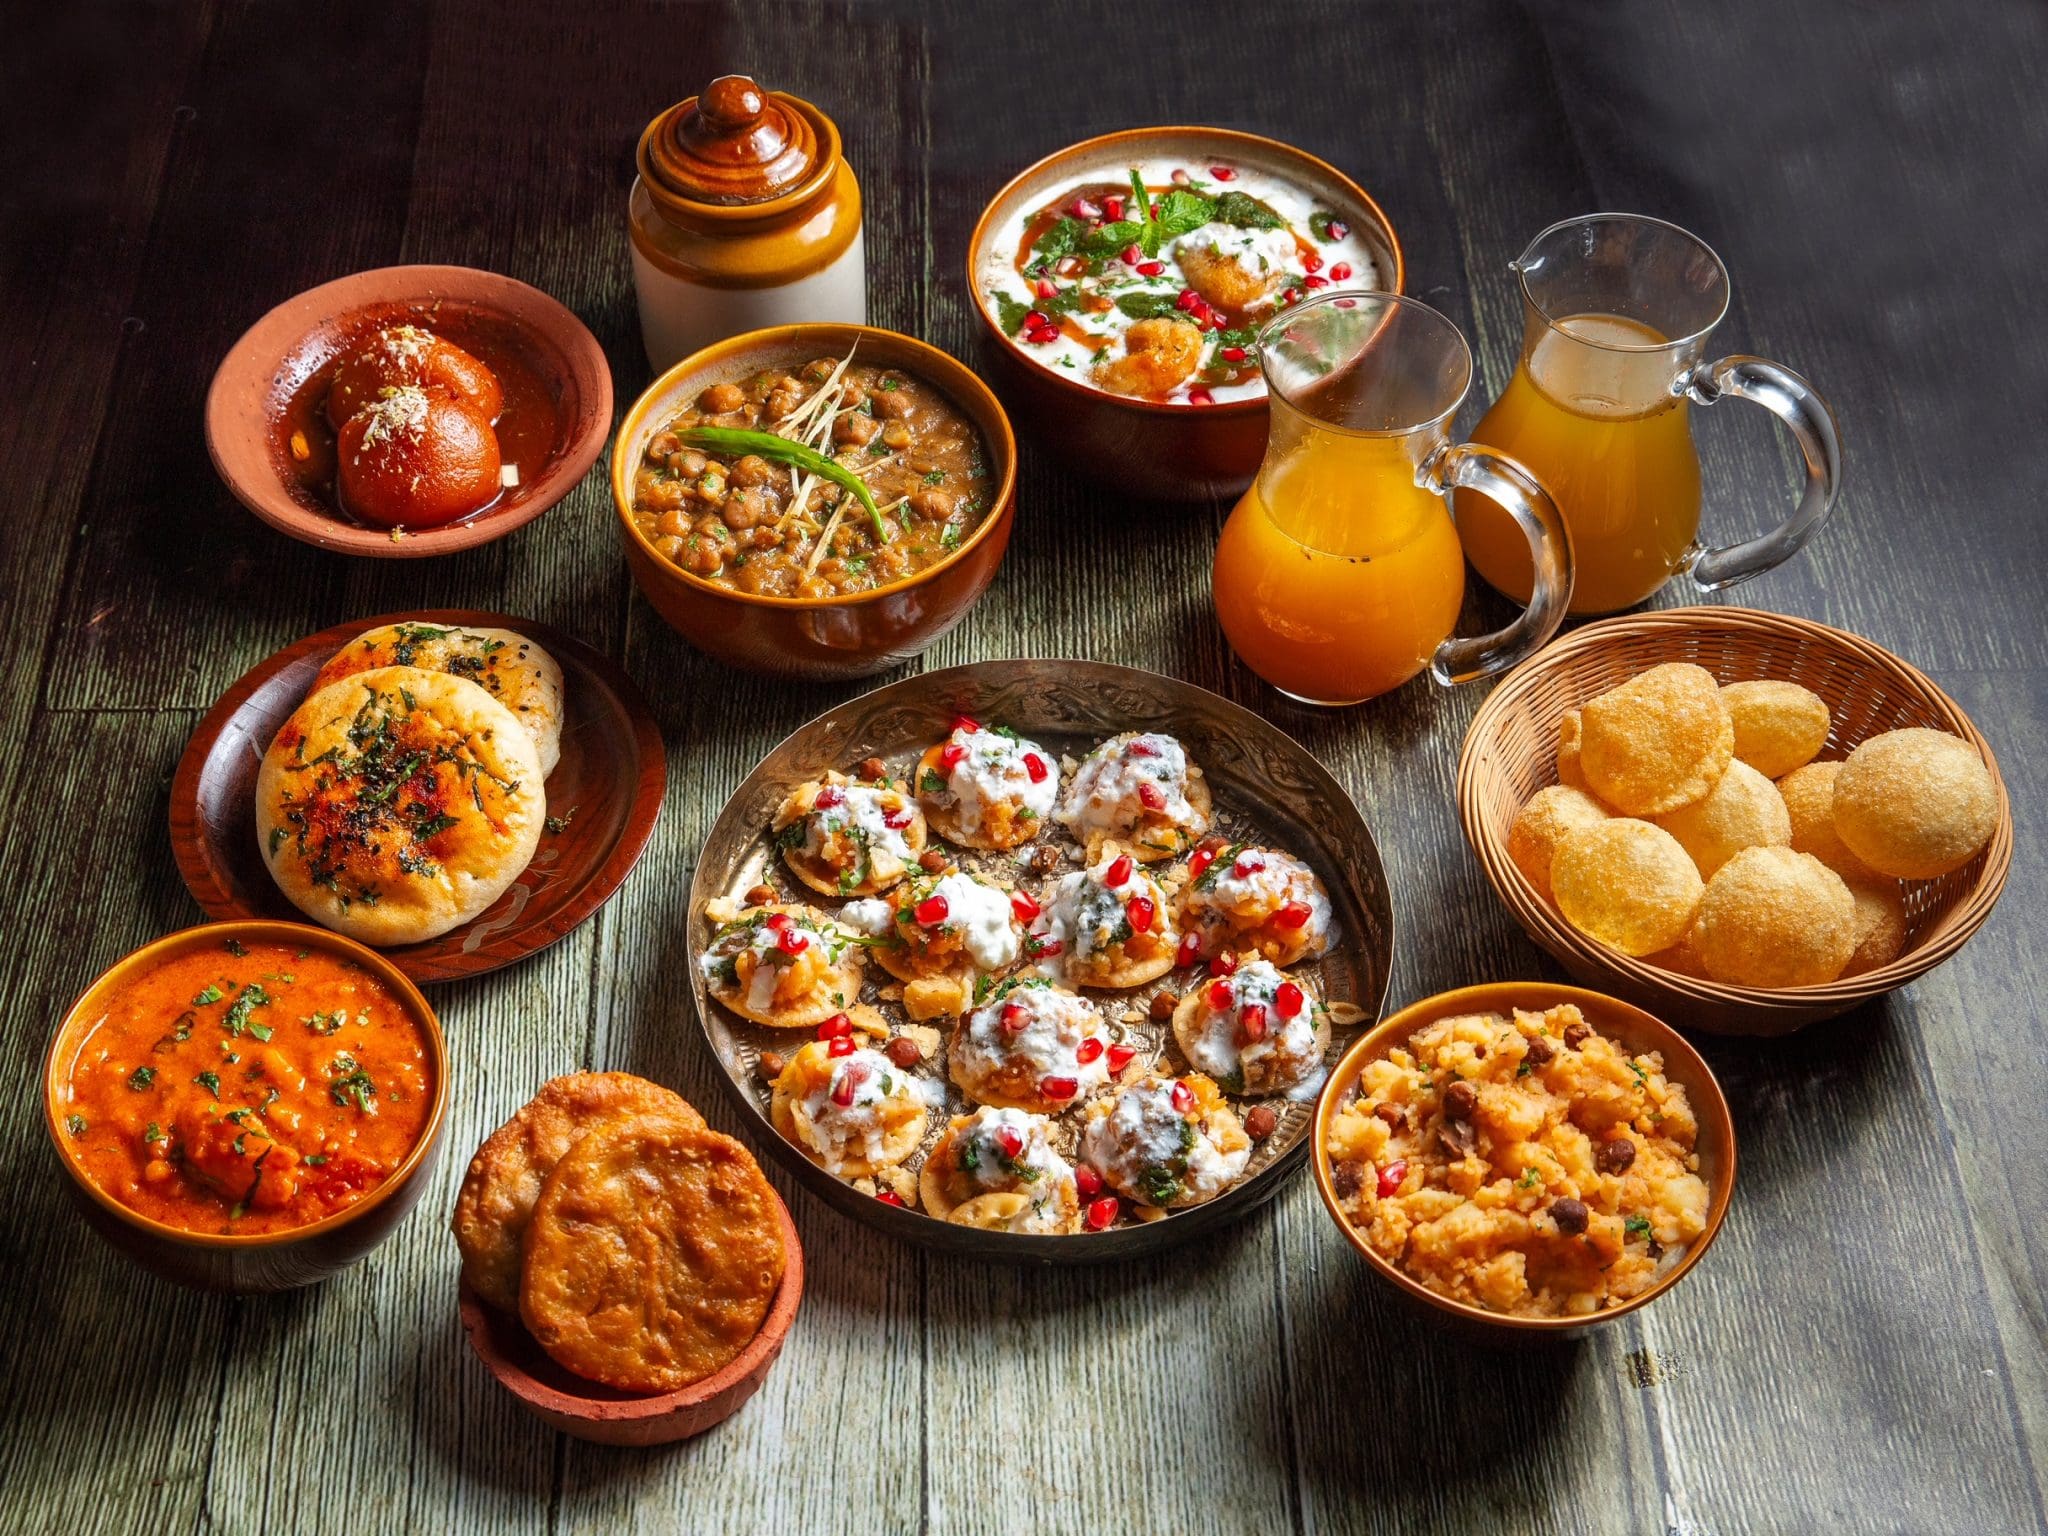 Enjoy flavours of Delhi’s legendary food culture with Chaat and Chat